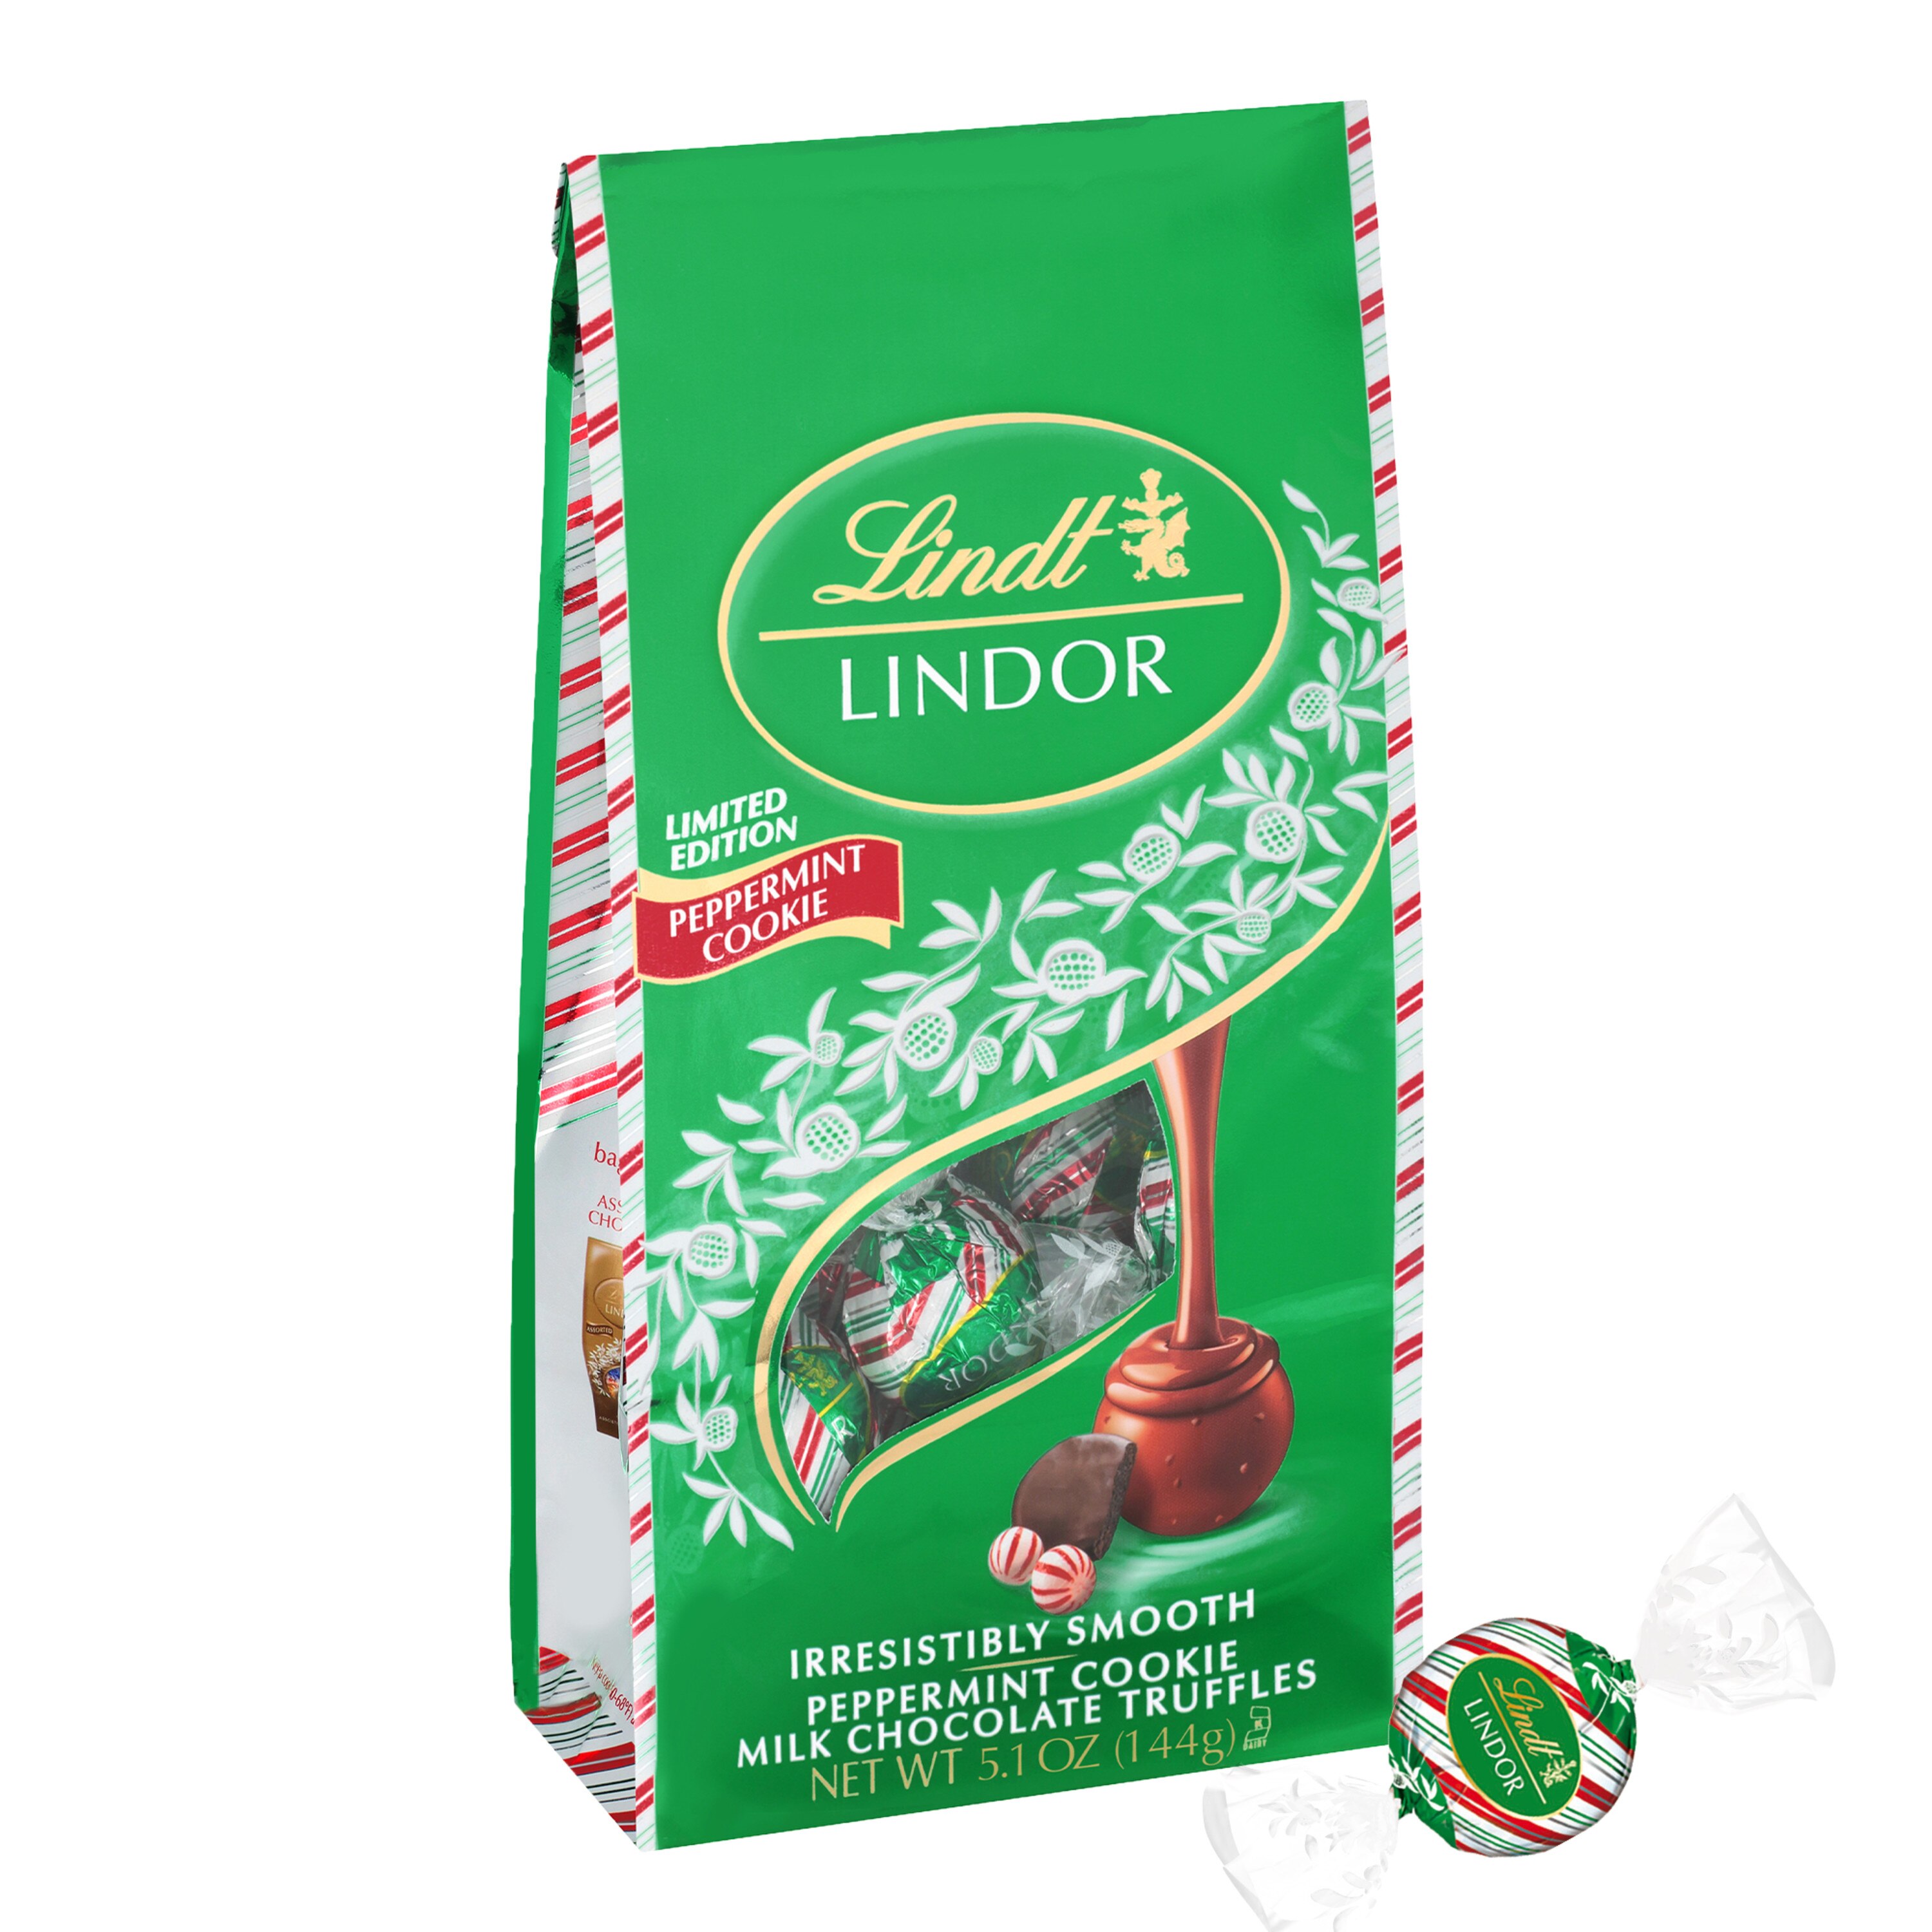 Lindt LINDOR Holiday Limited Edition Peppermint Cookie Milk Chocolate Candy Truffles with Smooth Peppermint Truffle Center, 5.1 oz. Bag